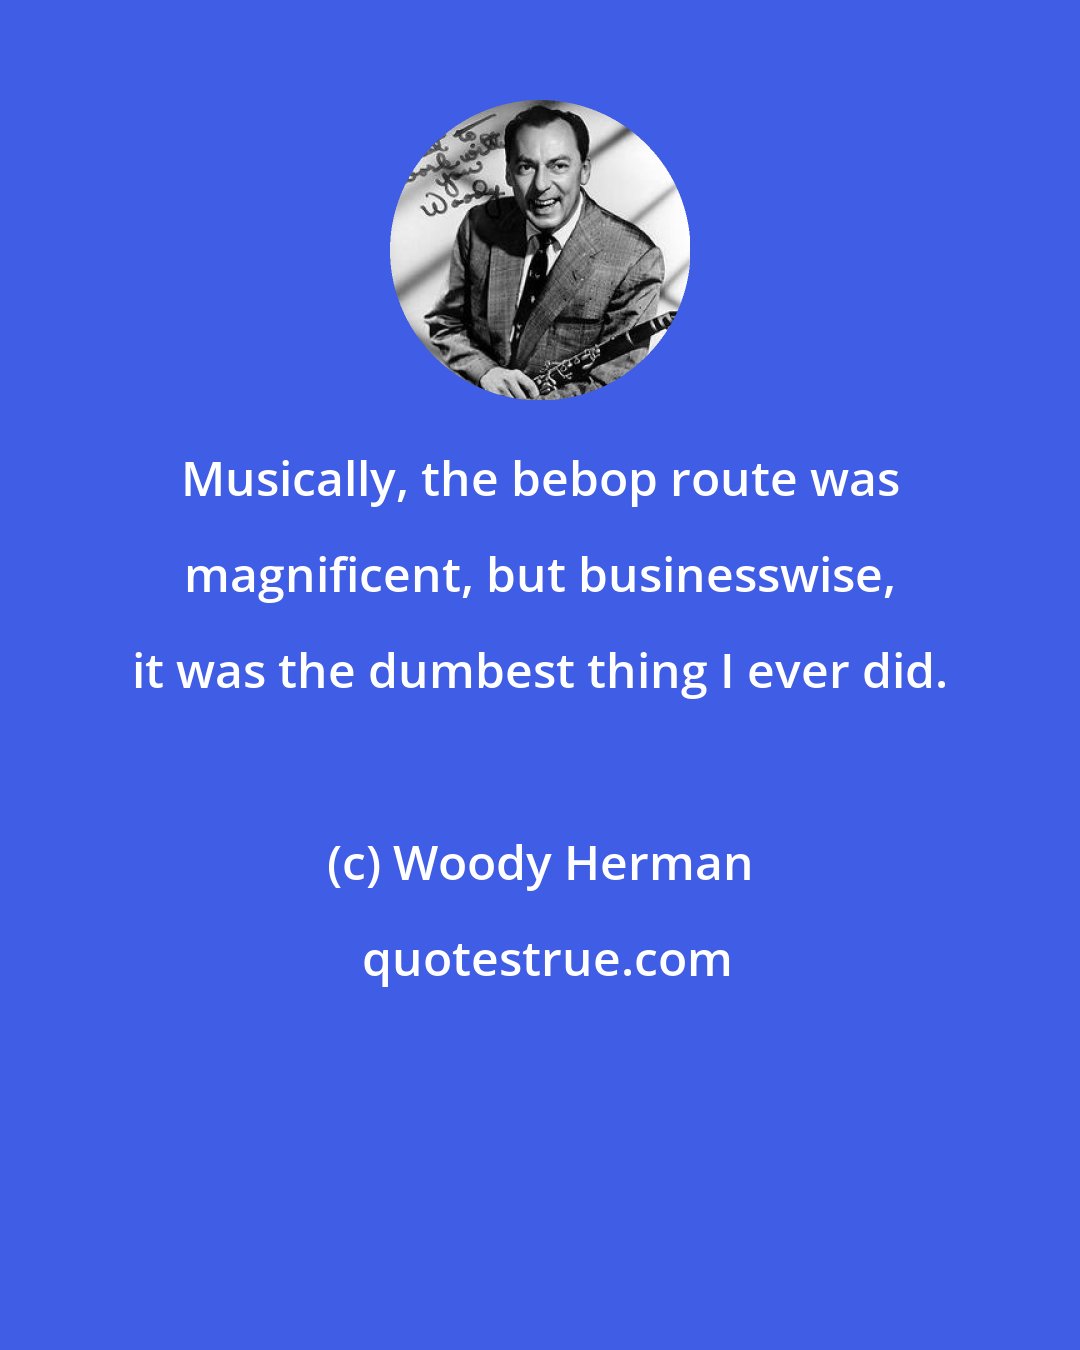 Woody Herman: Musically, the bebop route was magnificent, but businesswise, it was the dumbest thing I ever did.